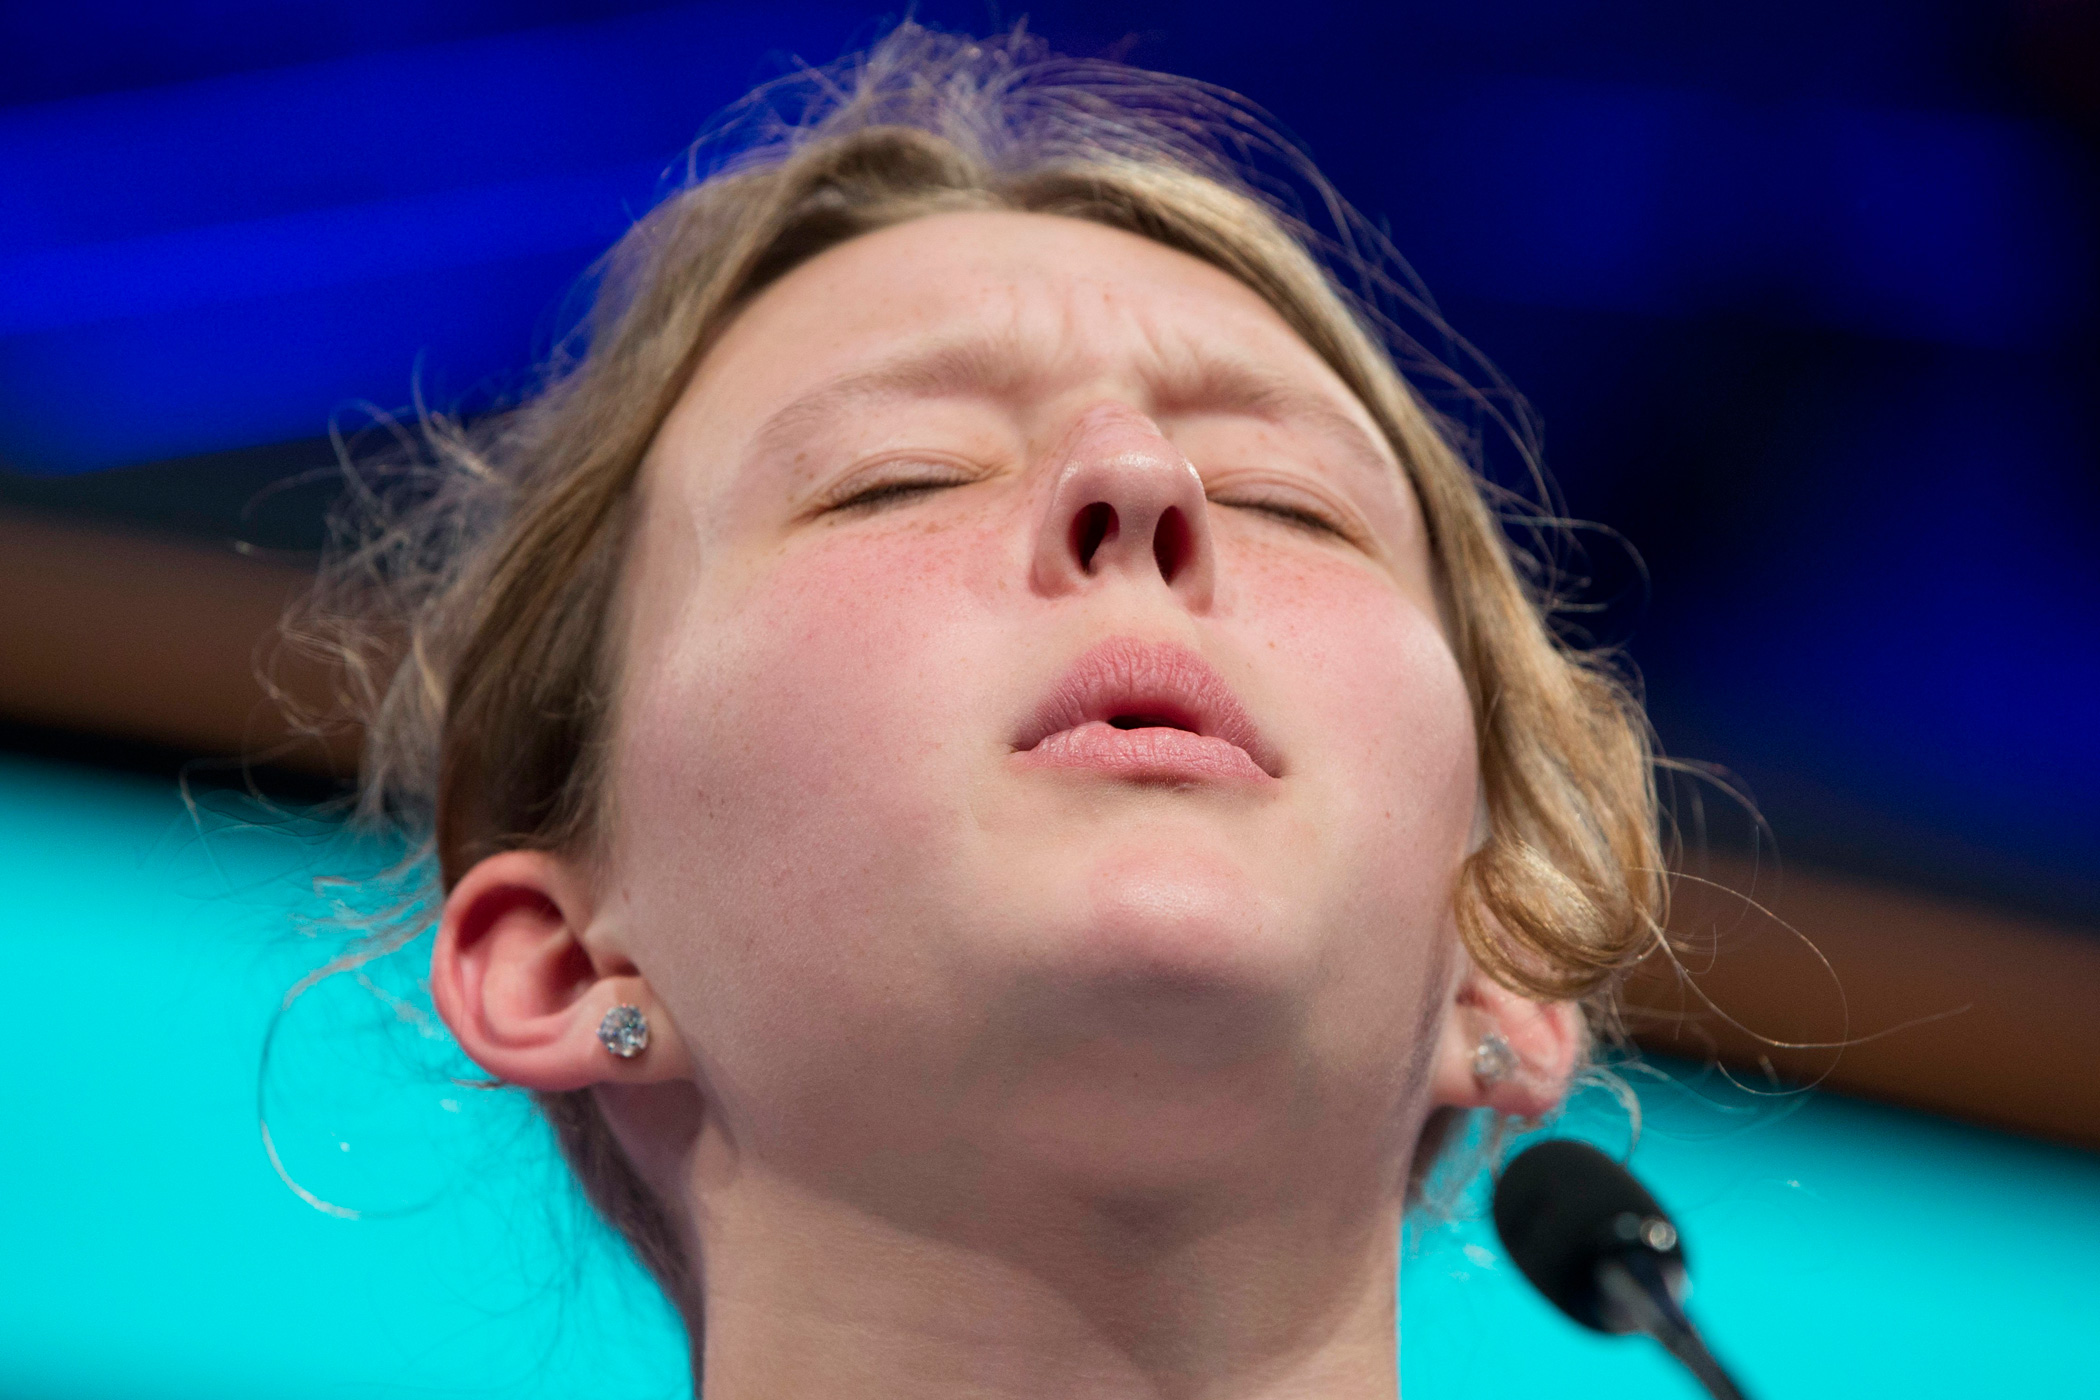 Rachel Rowe, 14, of Parkton, Md., reacts after misspelling her word during the preliminaries of the National Spelling Bee, in National Harbor, Md., May 25, 2016.